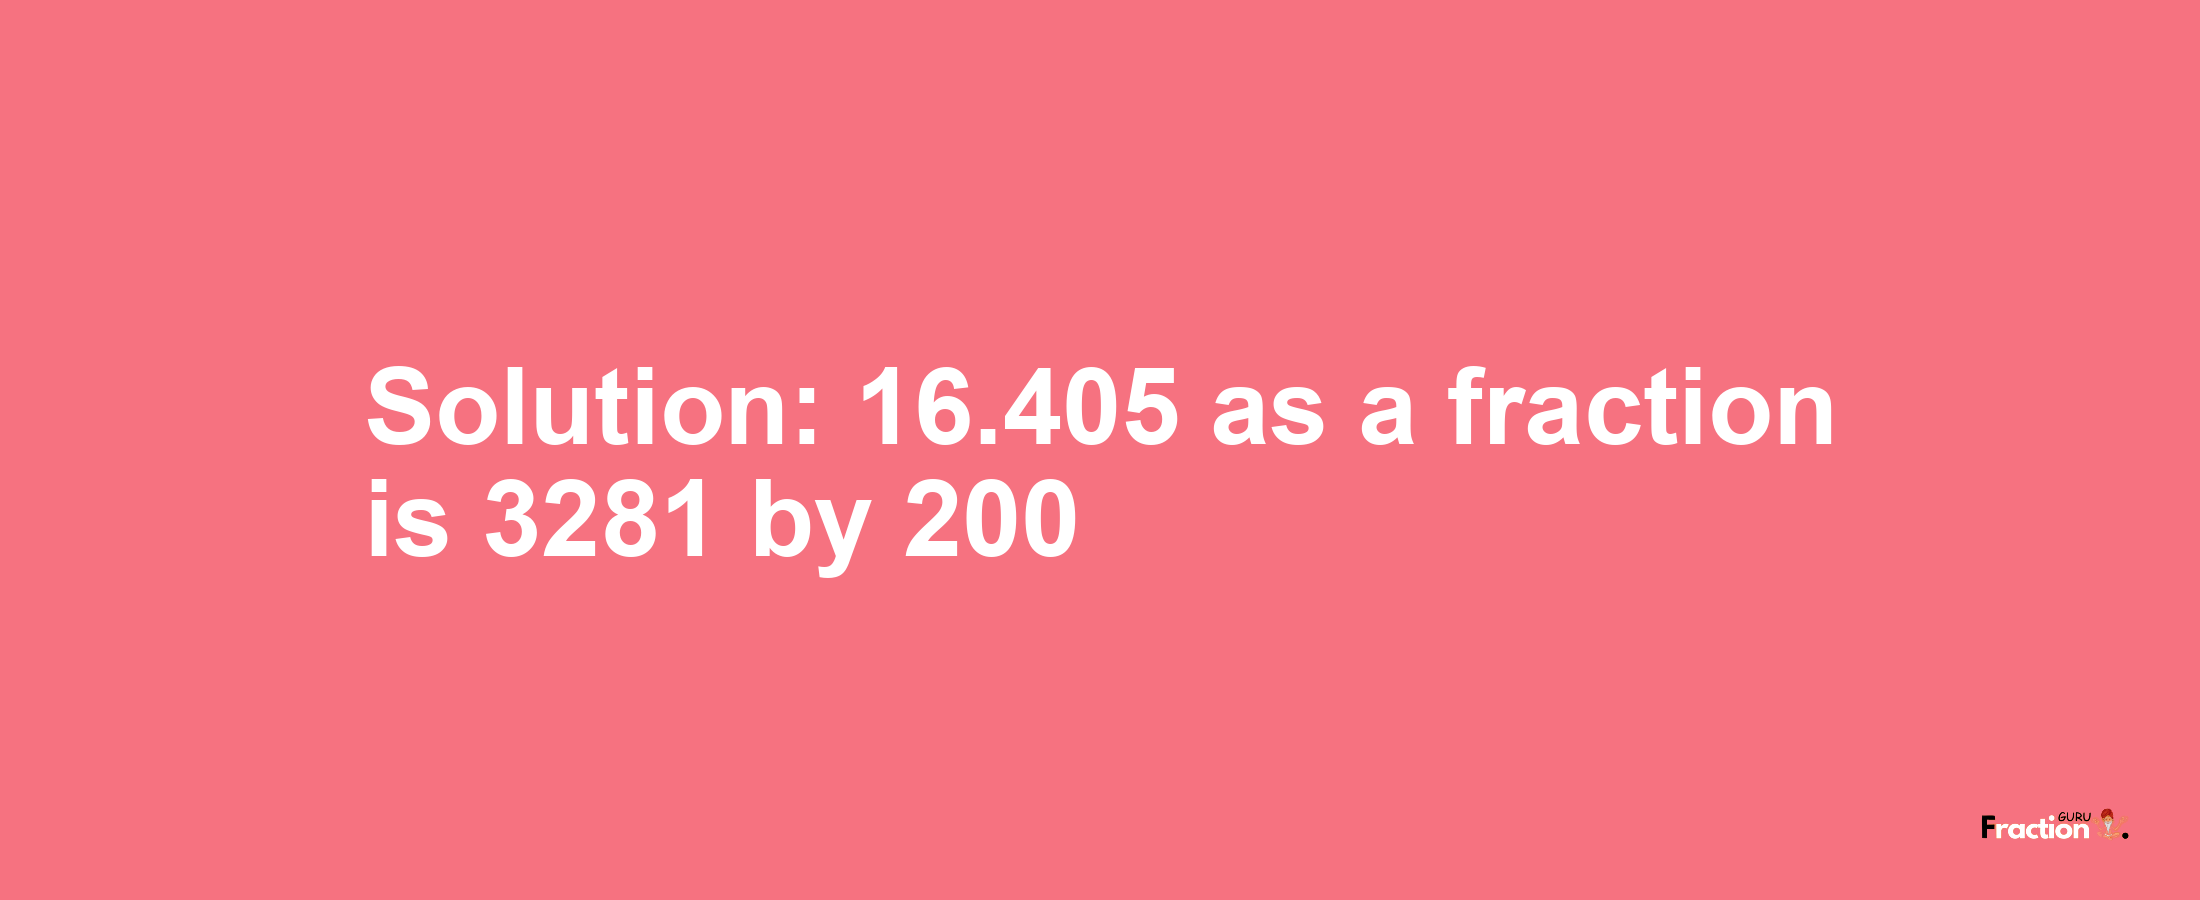 Solution:16.405 as a fraction is 3281/200